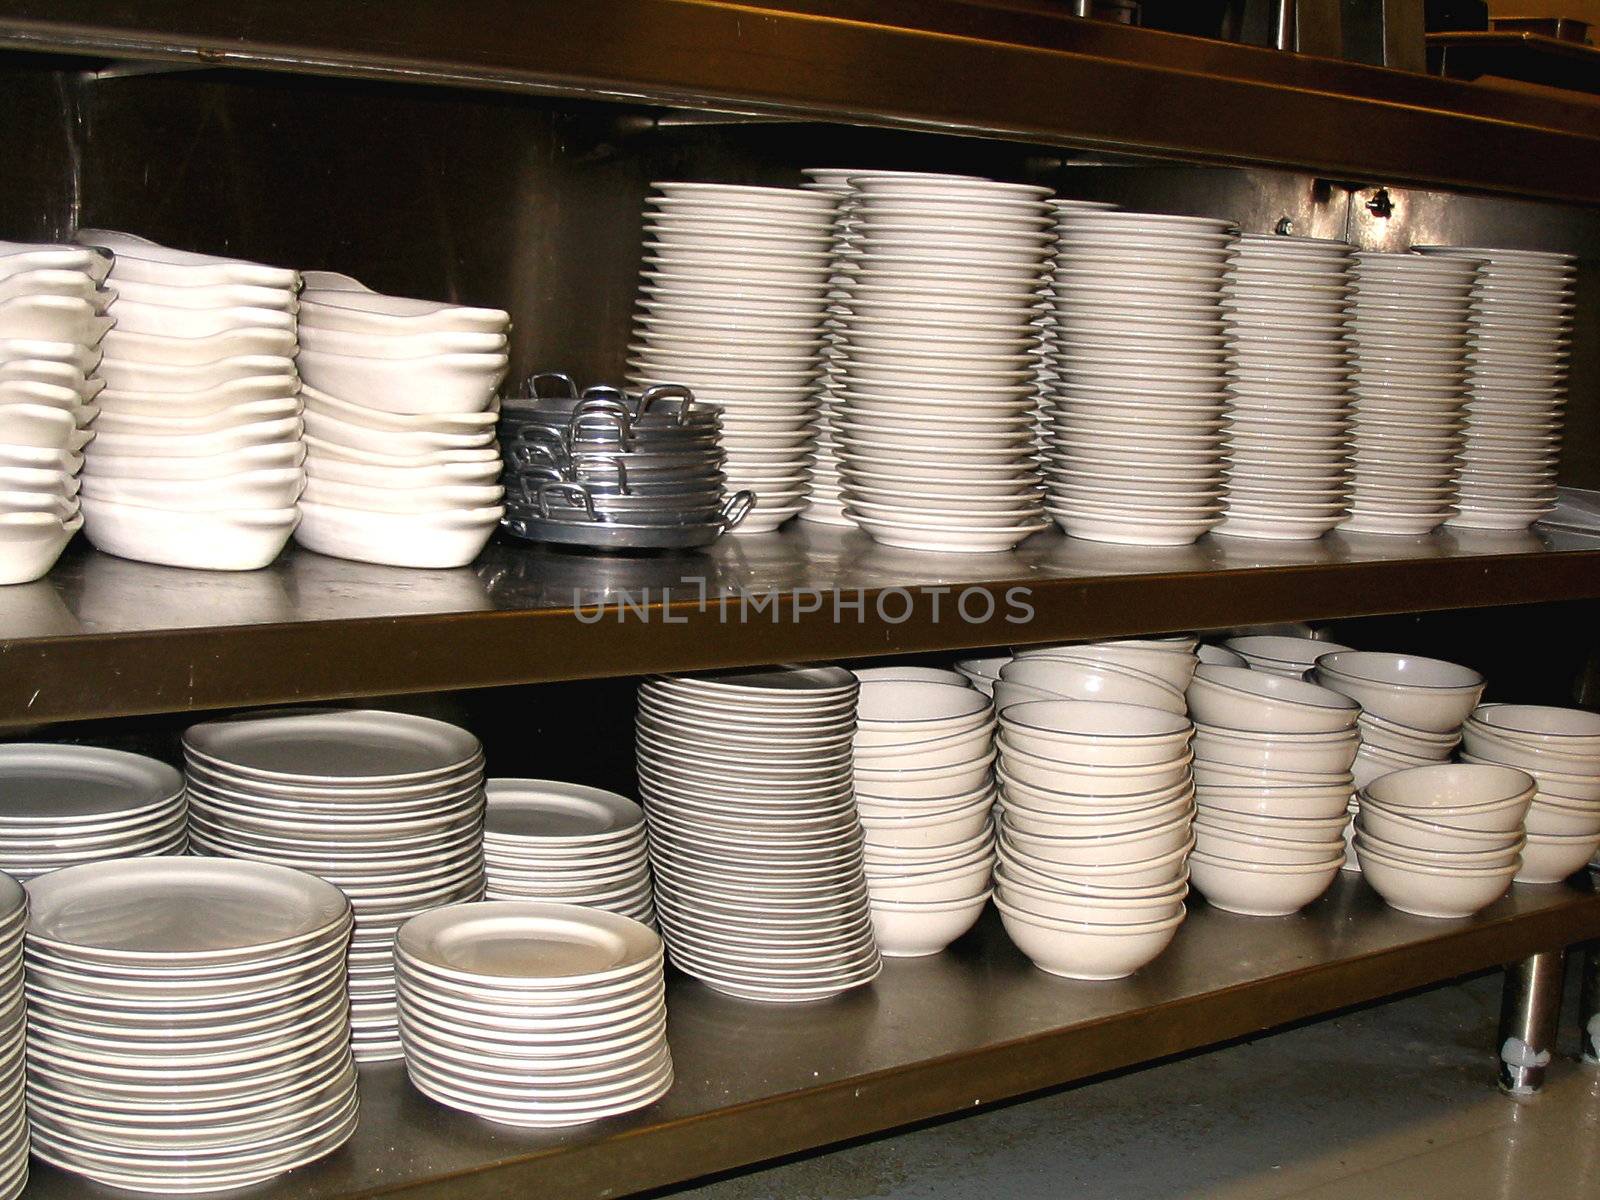 This is a picture of dishes in a restaurant ready for the cook to fill with the daily special, and send off to waiting customers. 